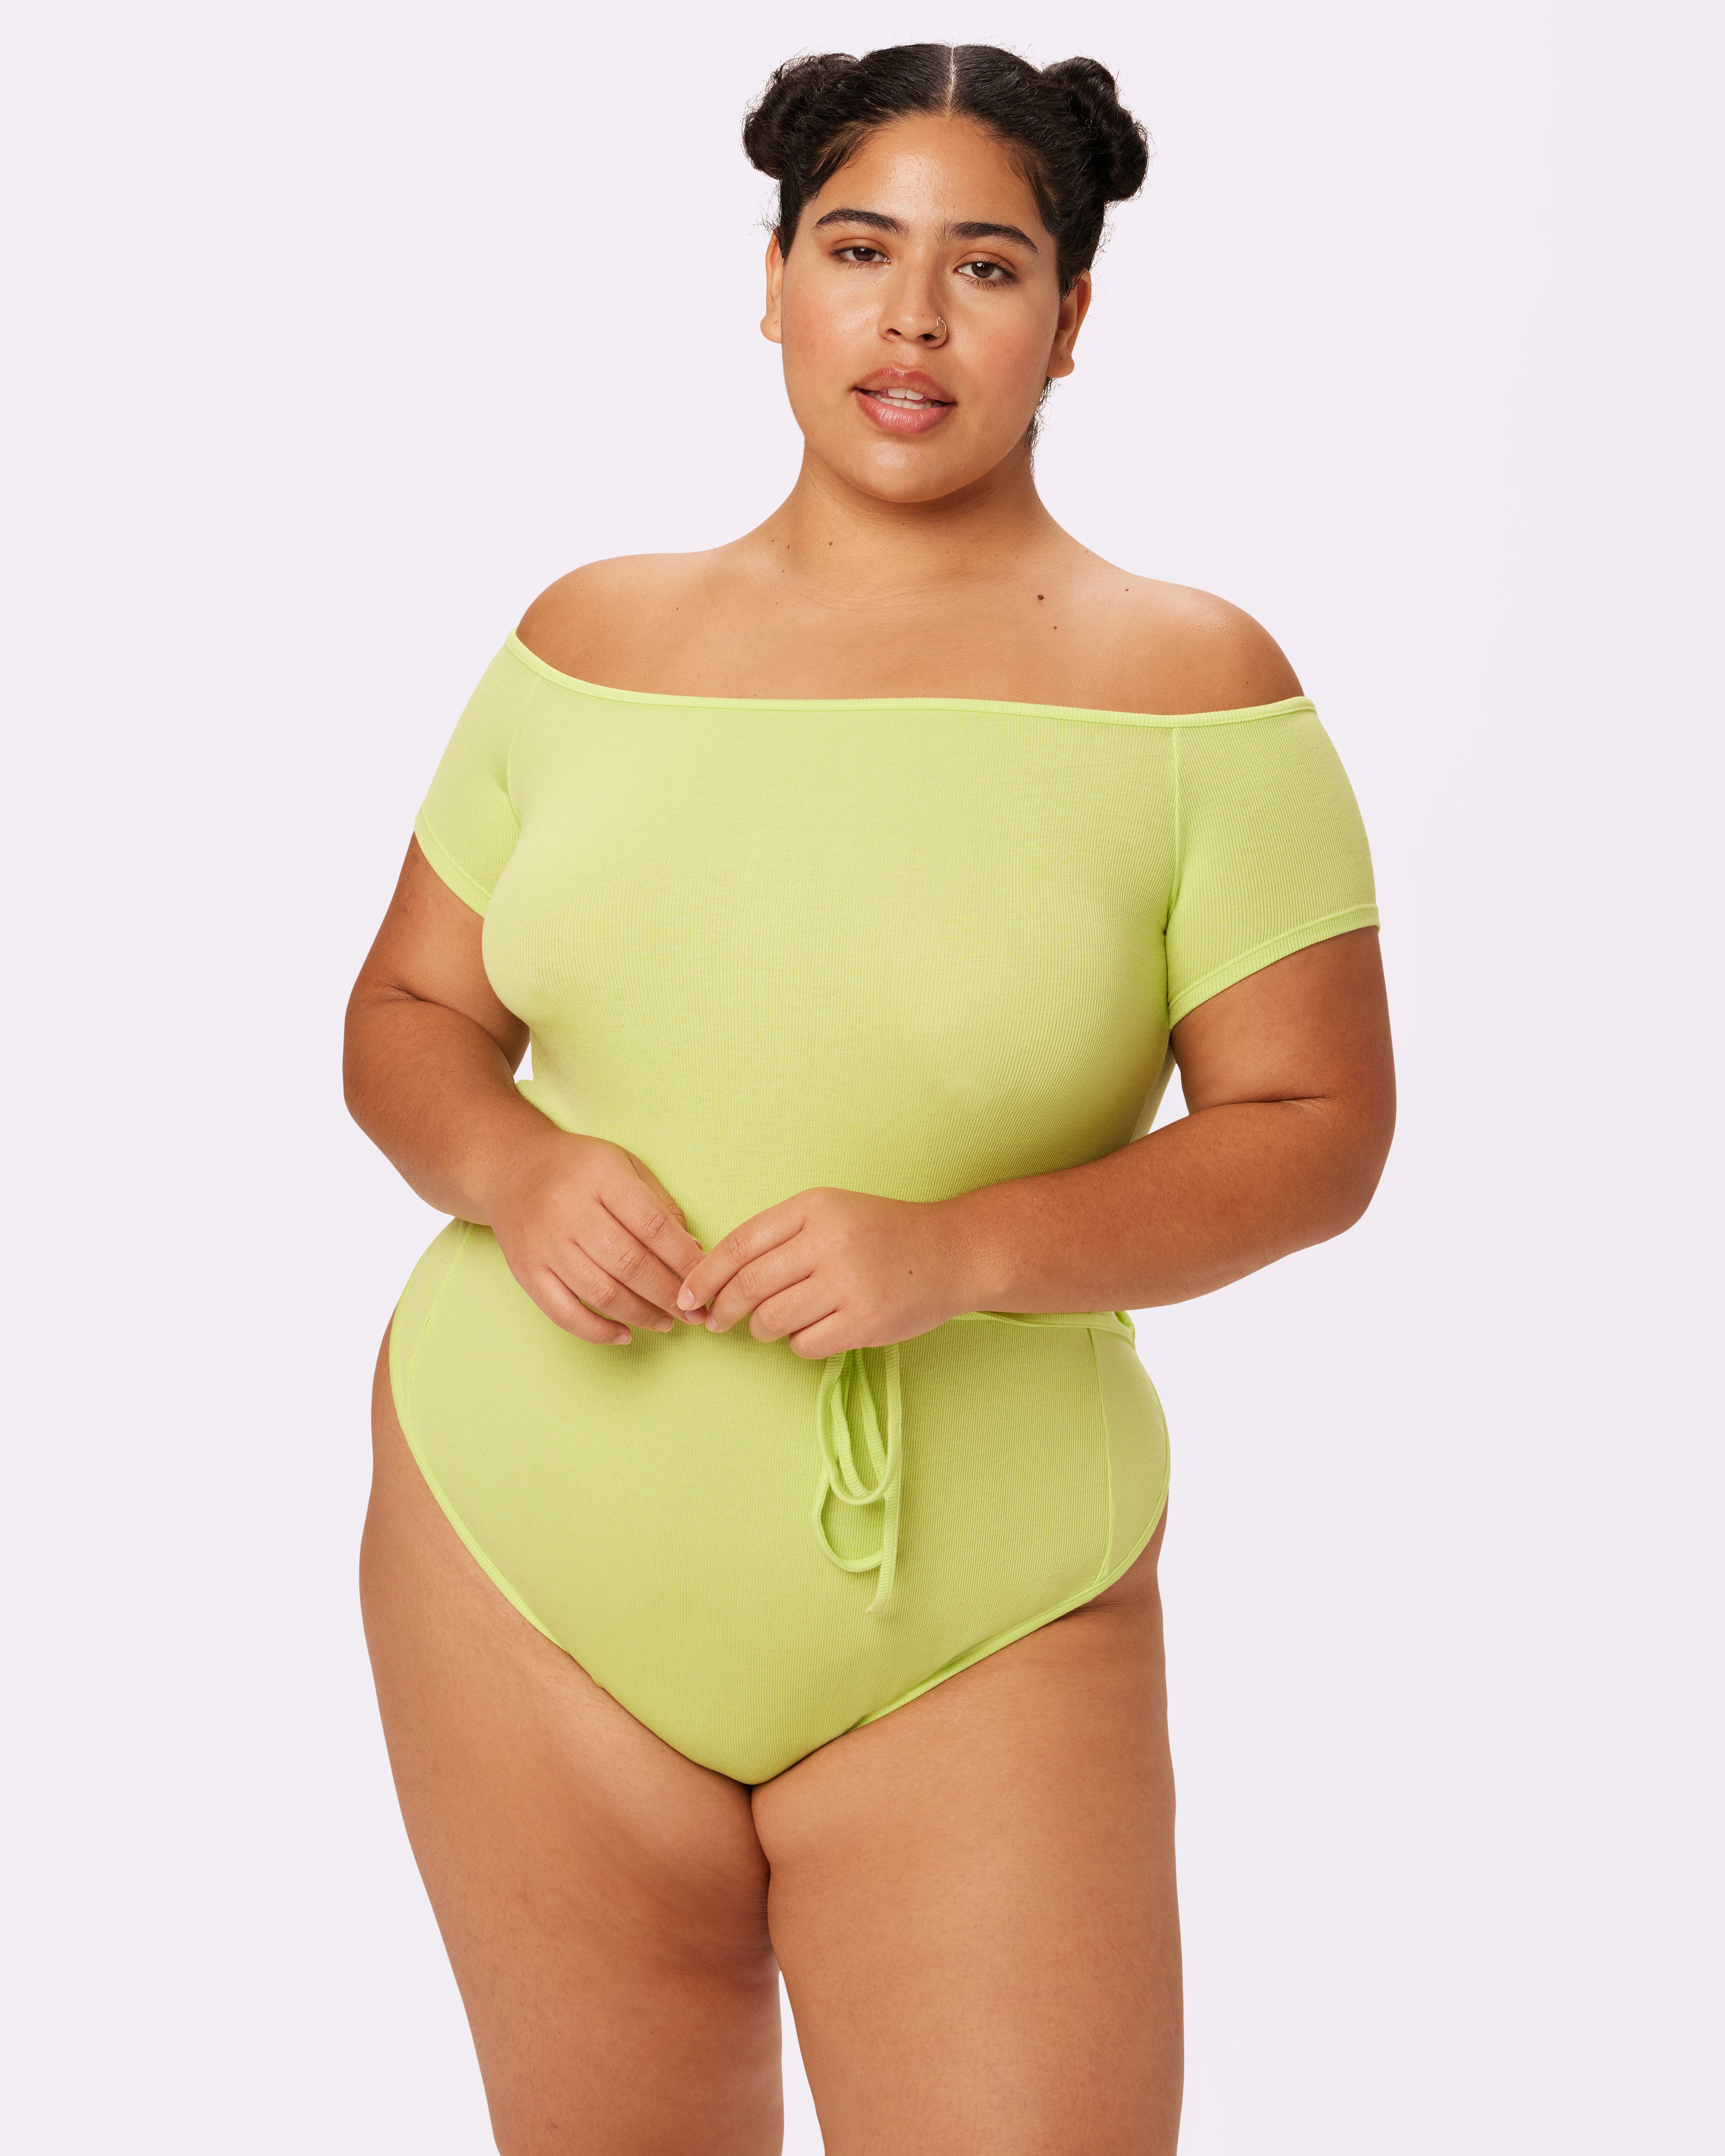 D Cup Ankle-length Full Bodysuit with Zipper 5G